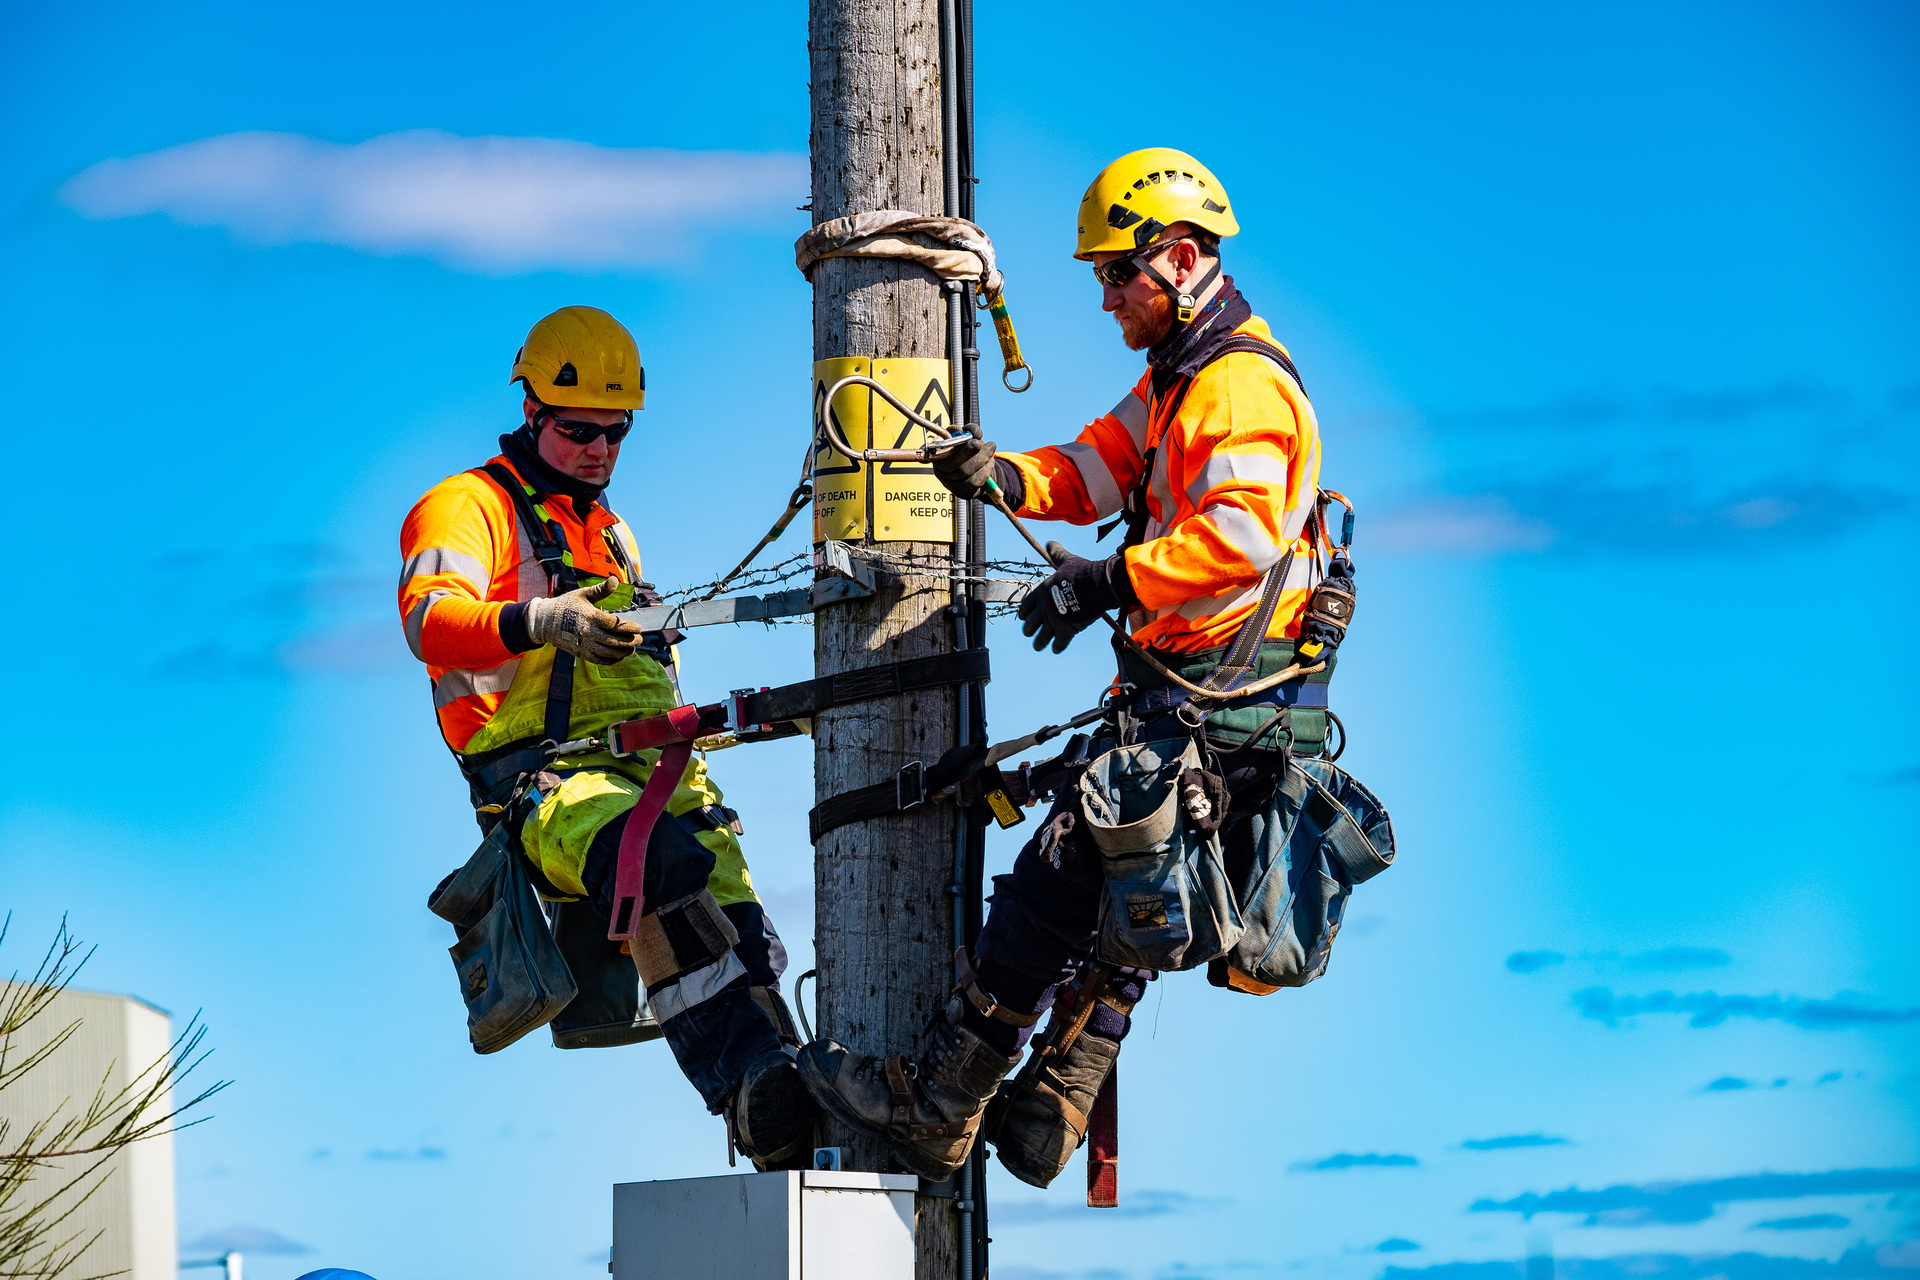 Engineers working at height on pole